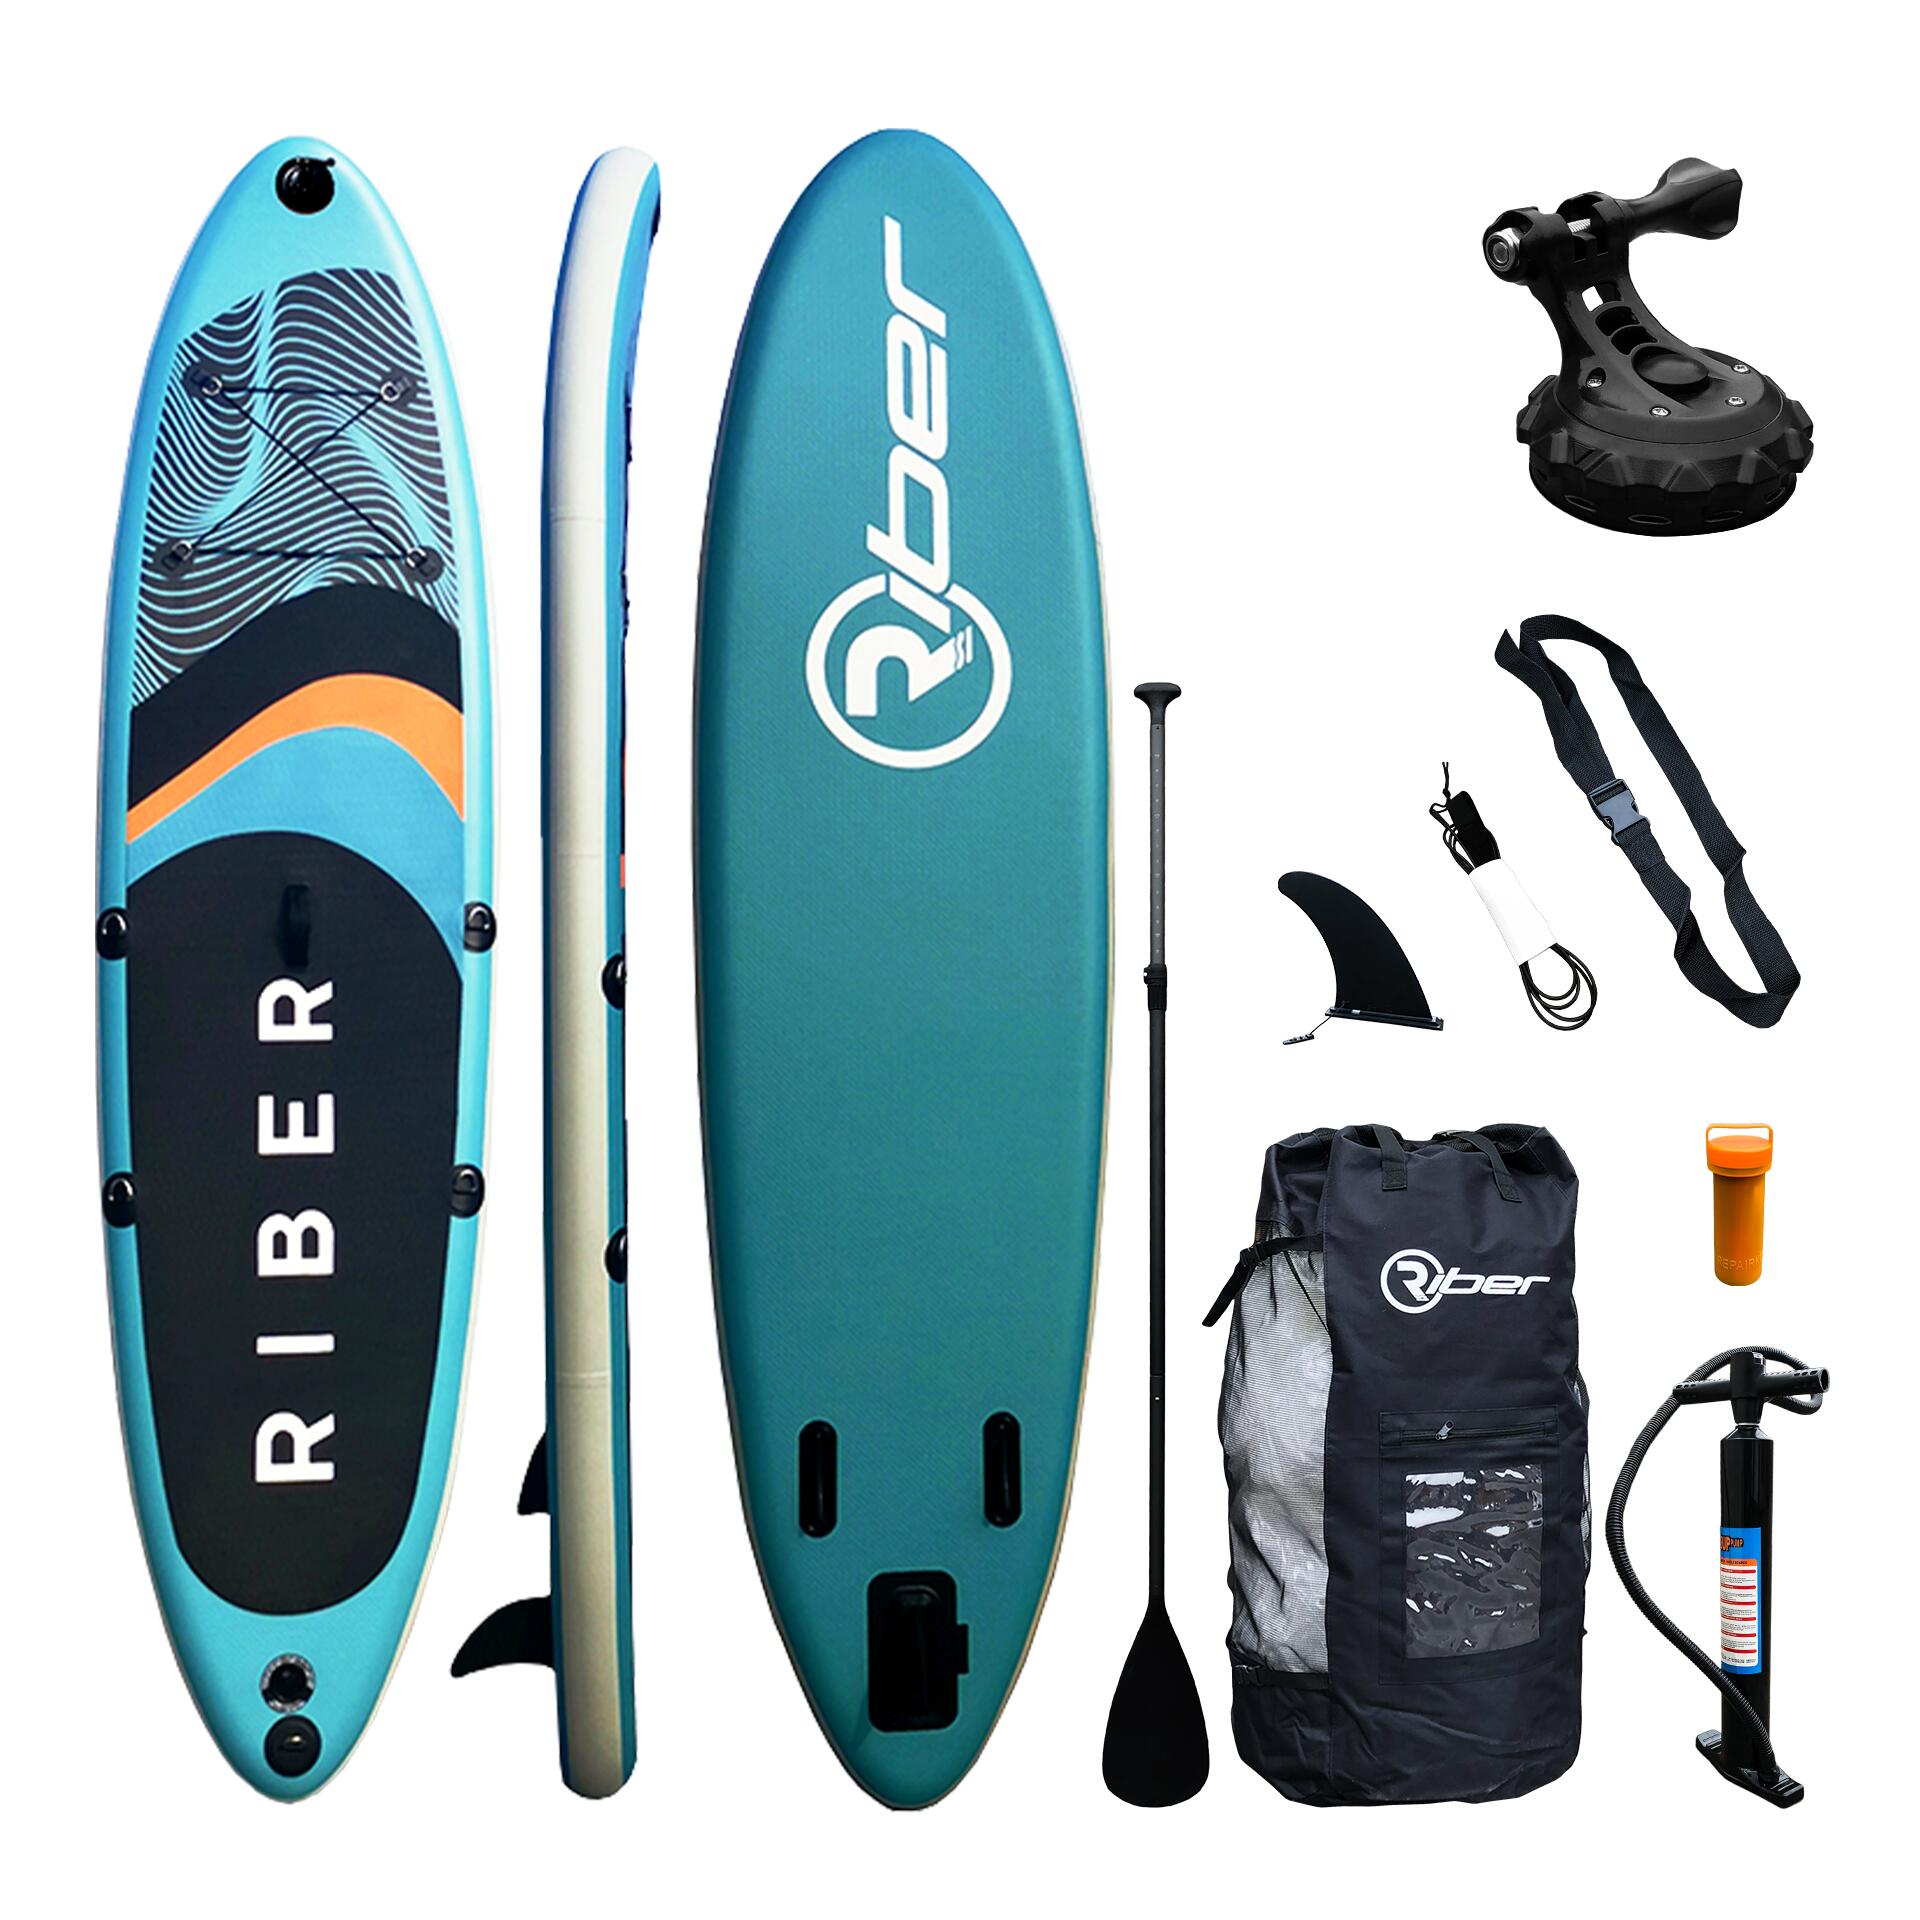 RIBER 322 iSUP 10'6" PACKAGE WITH ACCESSORY PACK 1/5